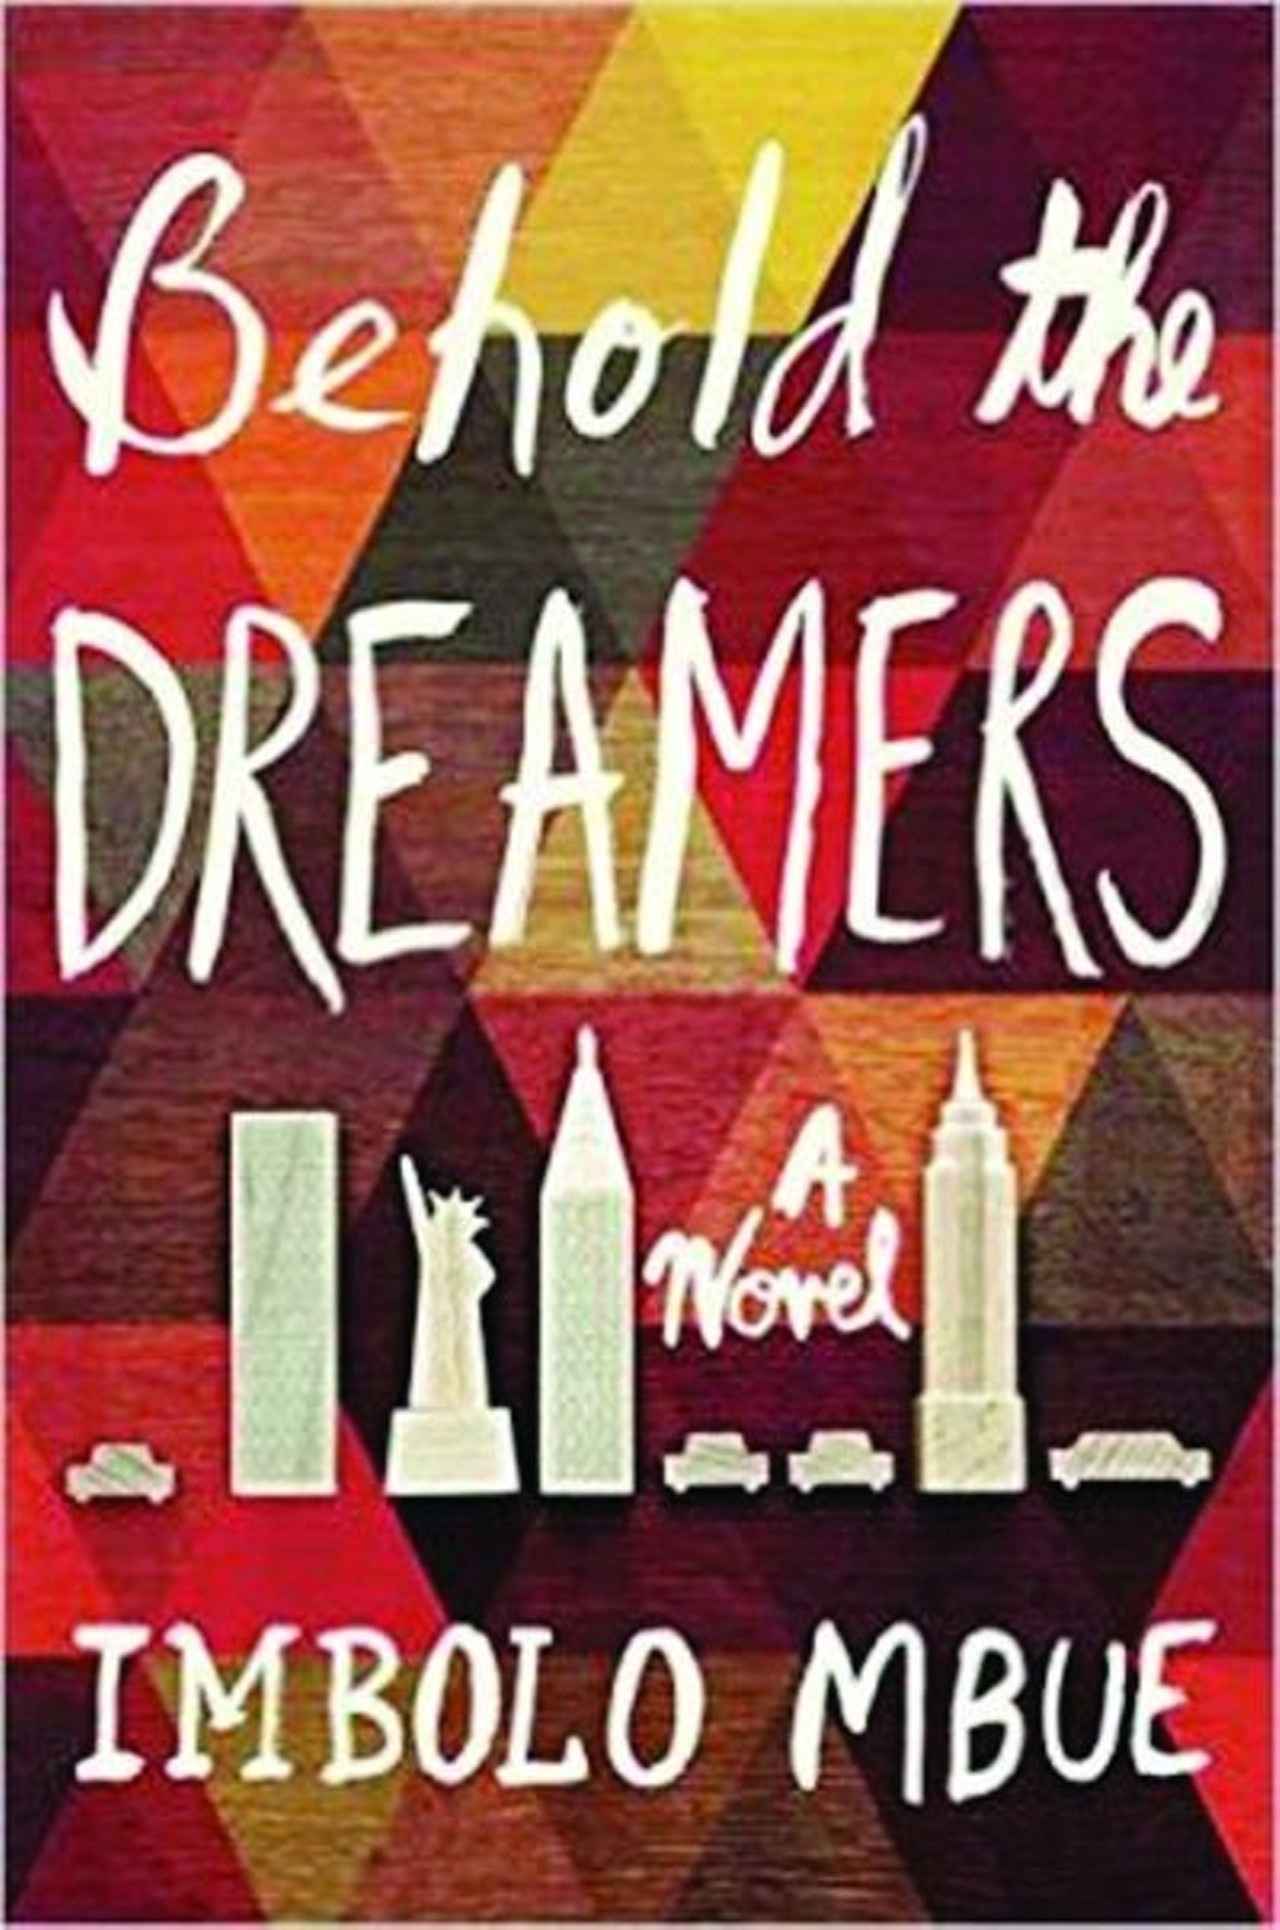 Behold The Dreamers by Imbolo Mbue -
In another debut novel to make this list, Mbue, a Cameroonian immigrant, tells a story of the daily struggles an immigrant family faces while also navigating America's immigration system. At a time when immigration has become one of the most contentious issues for the country, Mbue's work shows how the American dream is still very much alive for people all over the world. Behold the Dreamers shows the lengths to which some go to live in America despite the many hurdles and negativity they have to battle.